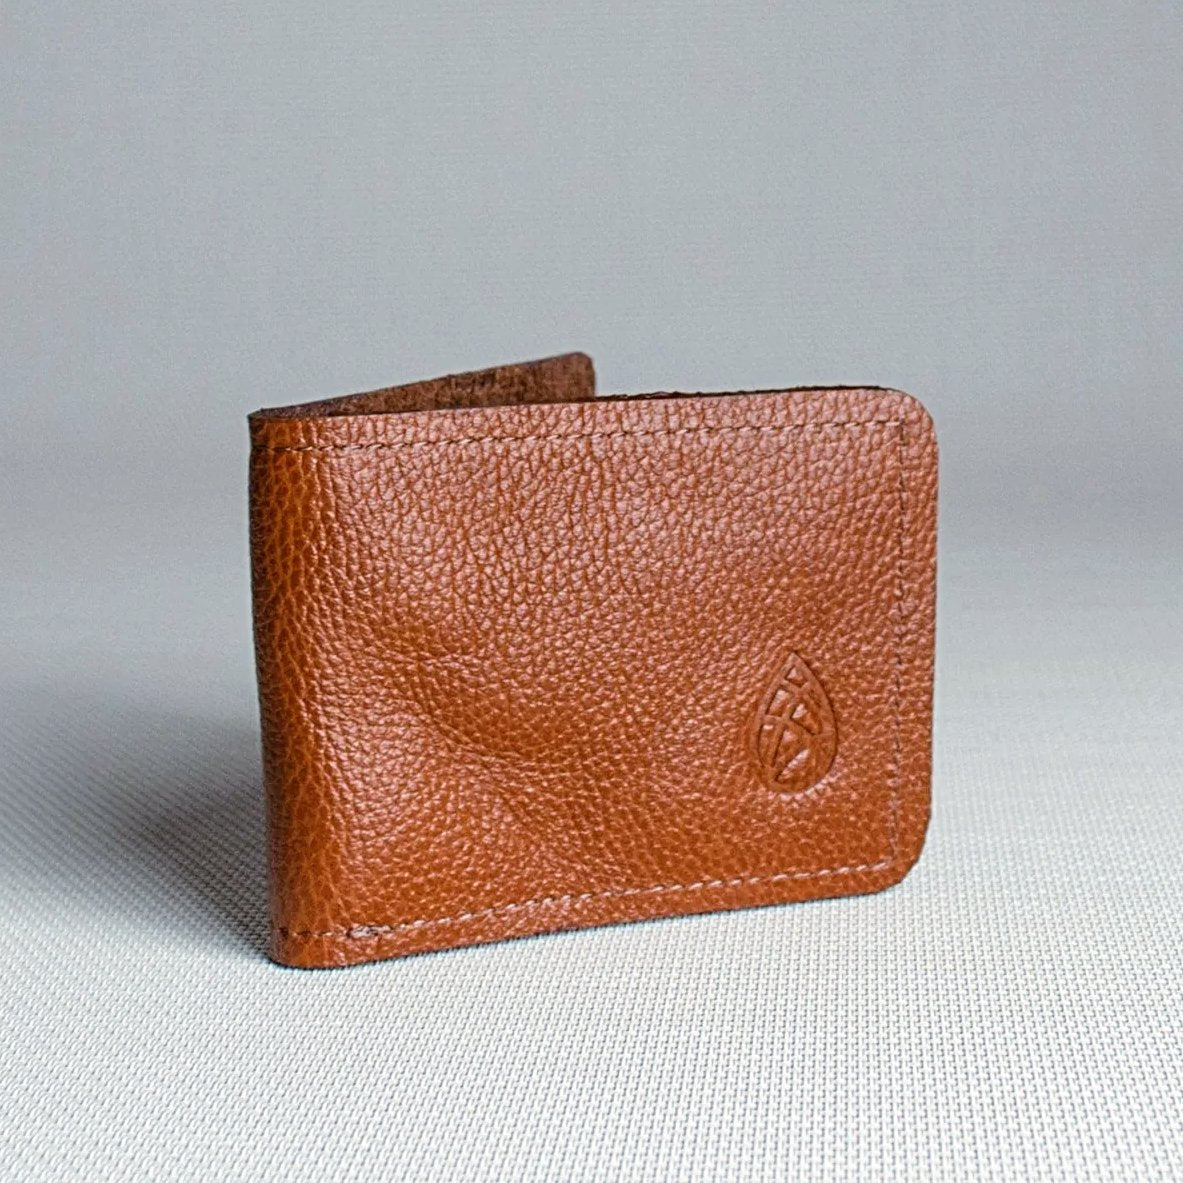 Luxury Car Leather Wallet handcrafted by Unshattered artisans.